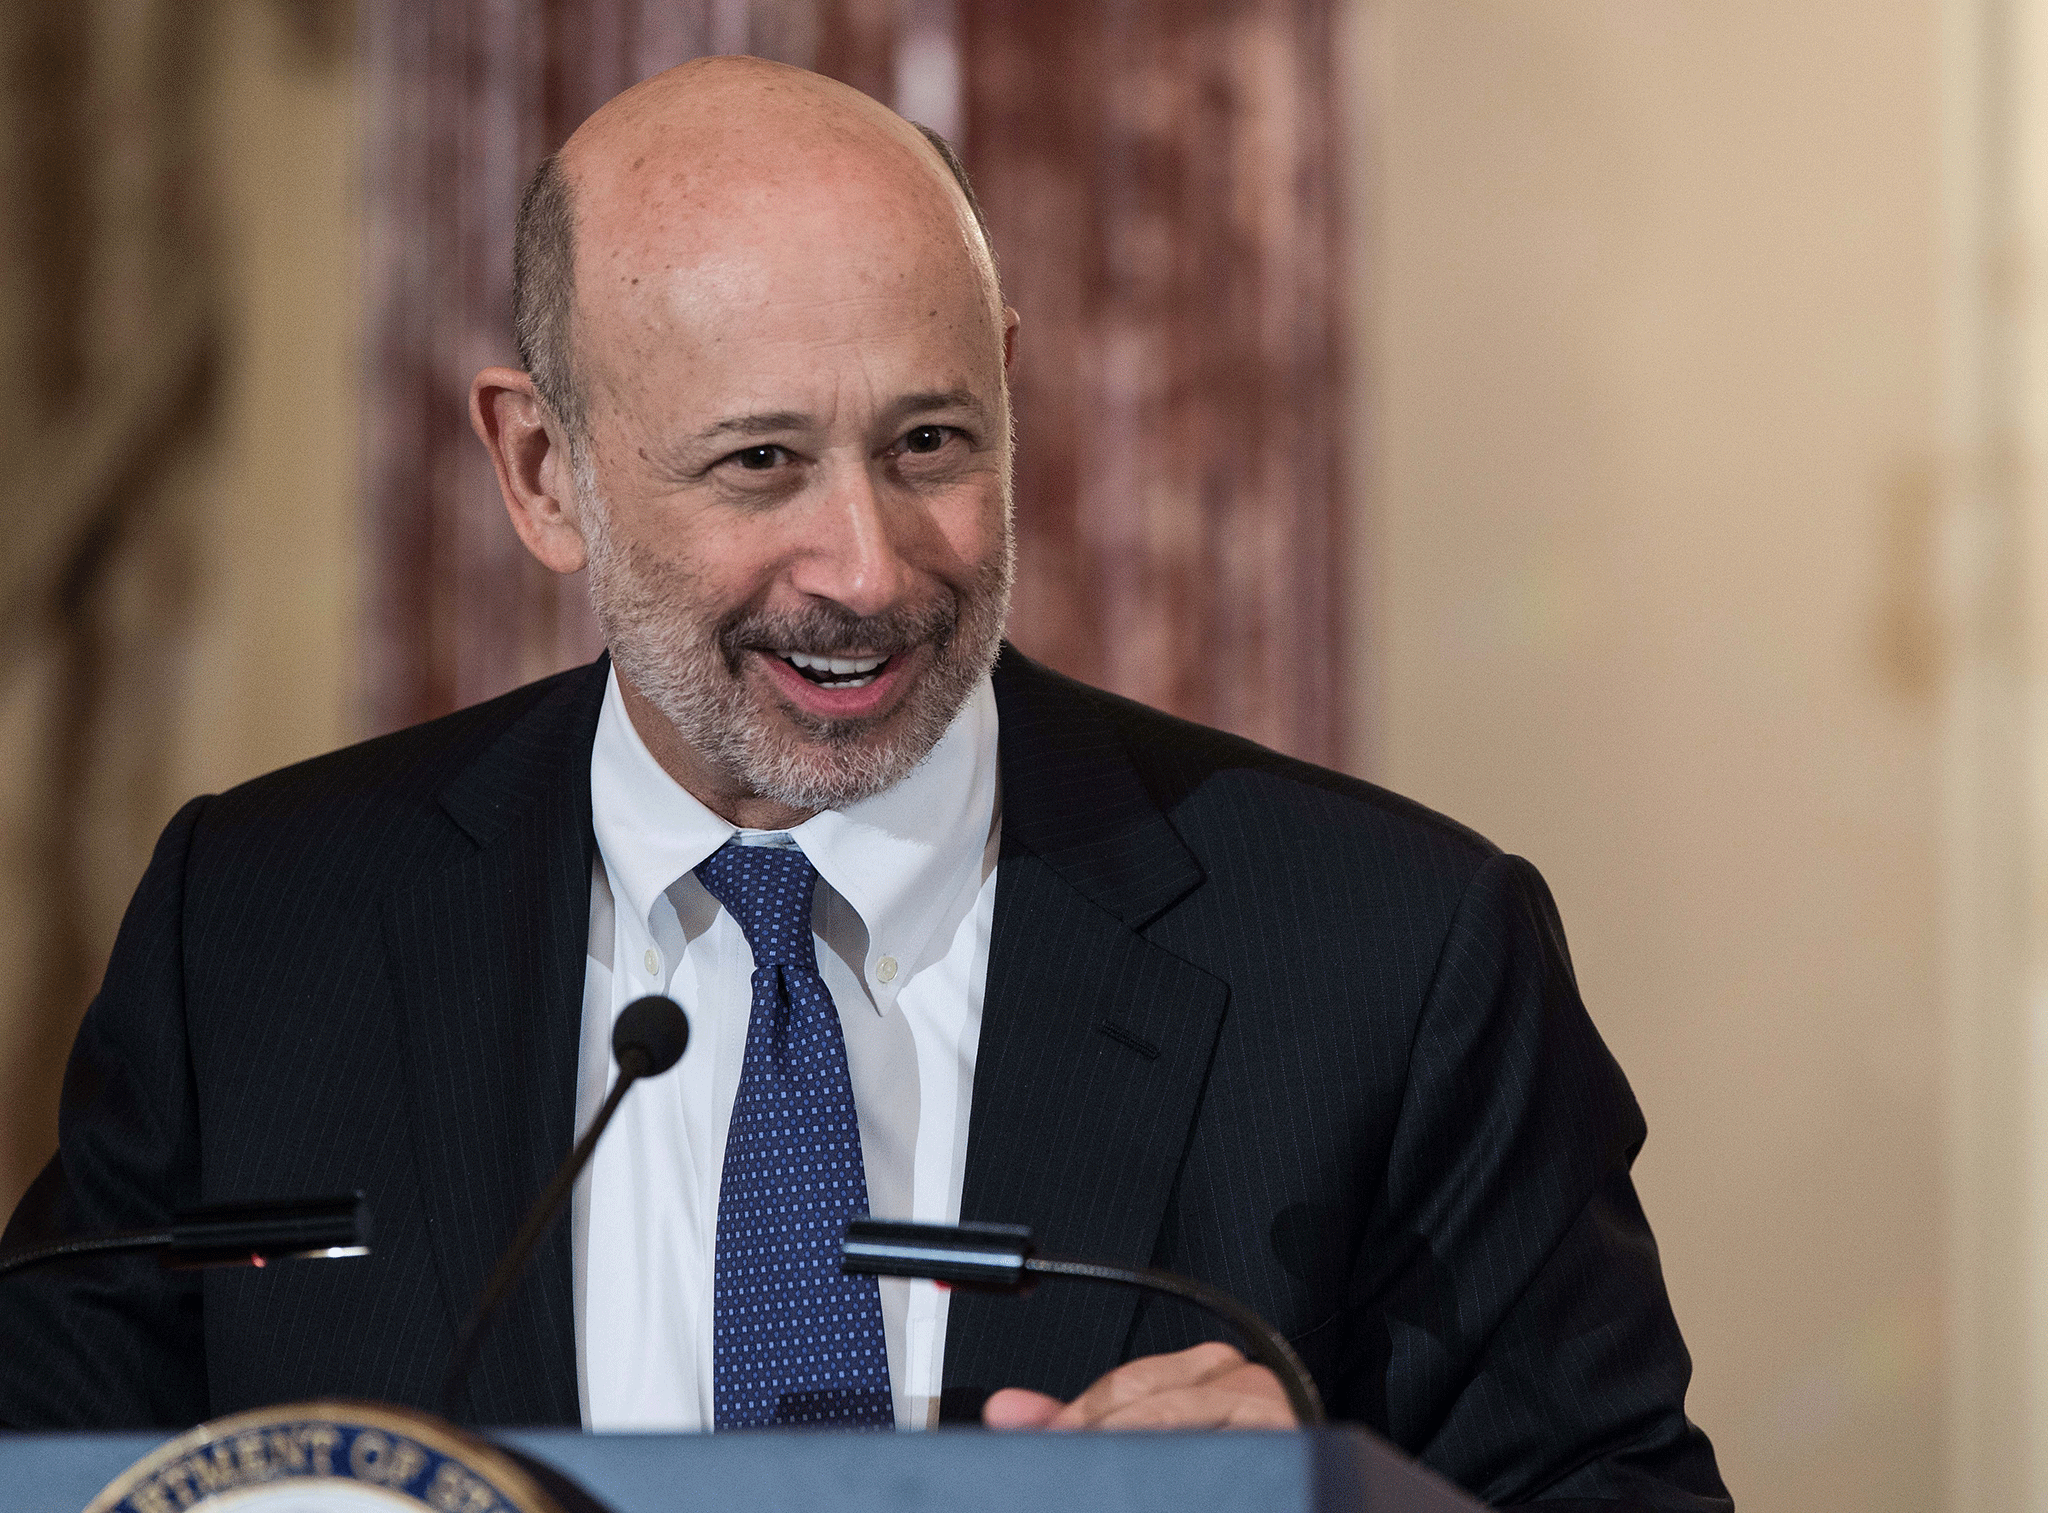 Mr Blankfein, who has been CEO of Goldman Sachs since 2006, was one of the first Wall Street executives to speak out against Mr Trump’s travel ban earlier this year